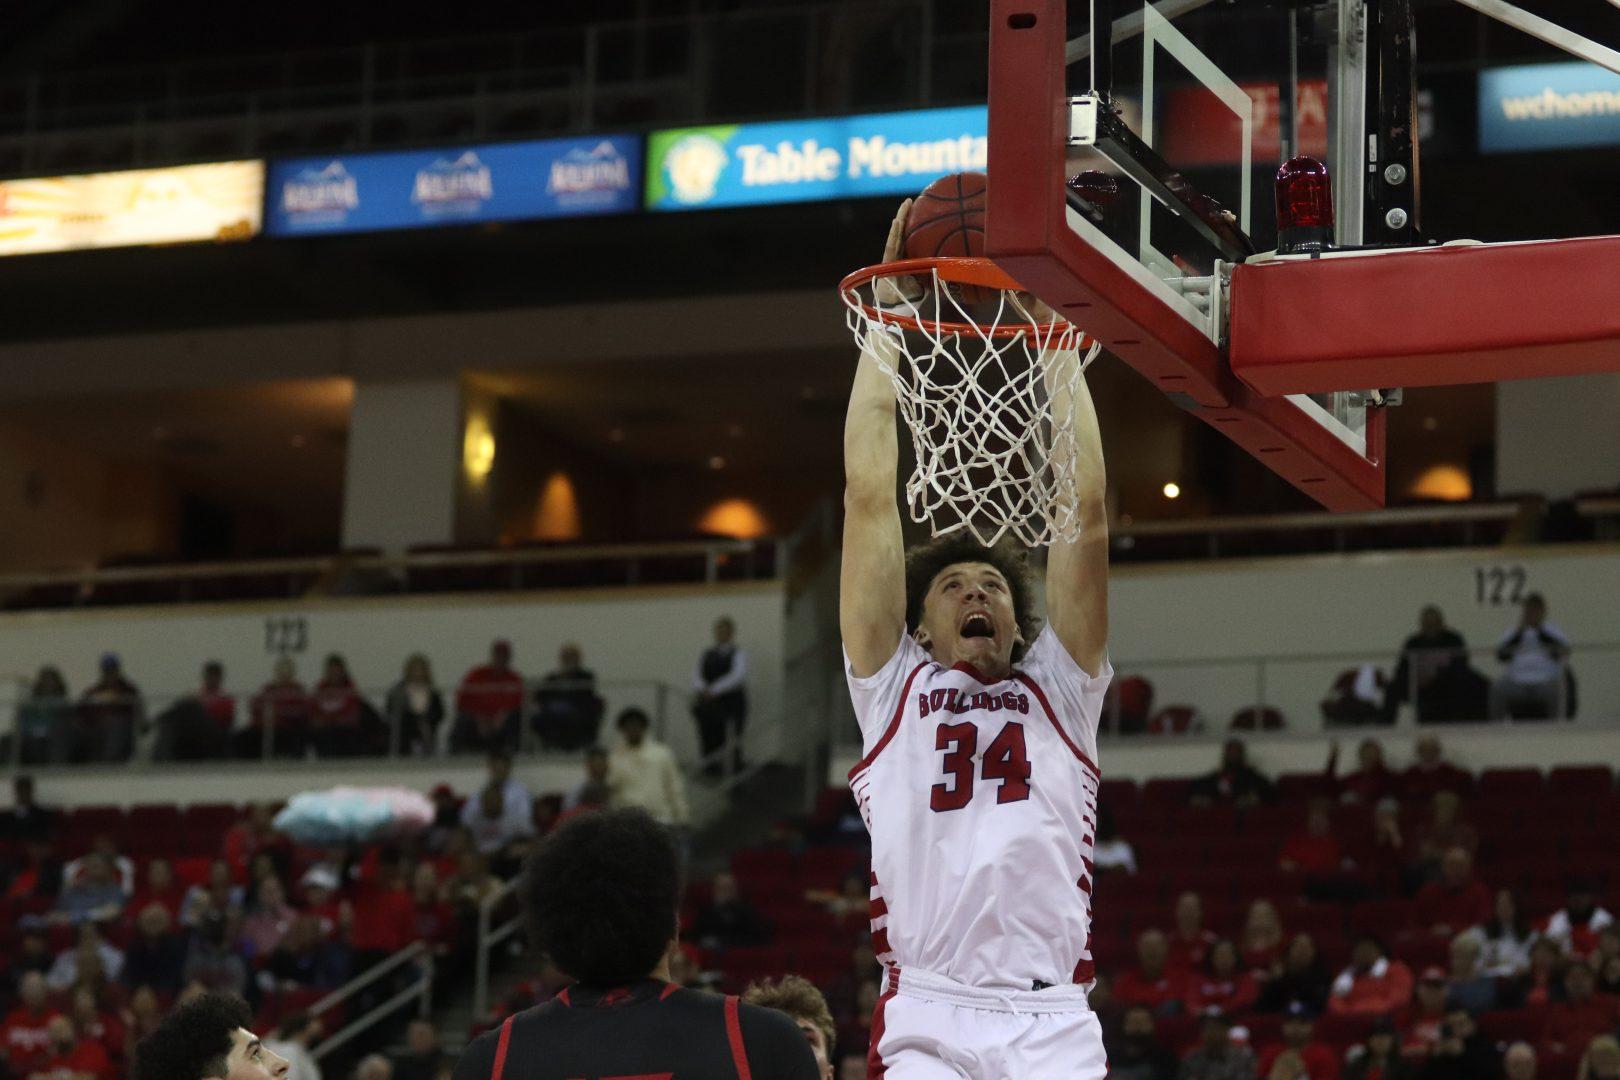 Center Braxton Meah dunks the ball in the semifinal game against Southern Utah on March 28, 2022 at Save Mart Center. (Melina Kazanjian/The Collegian)